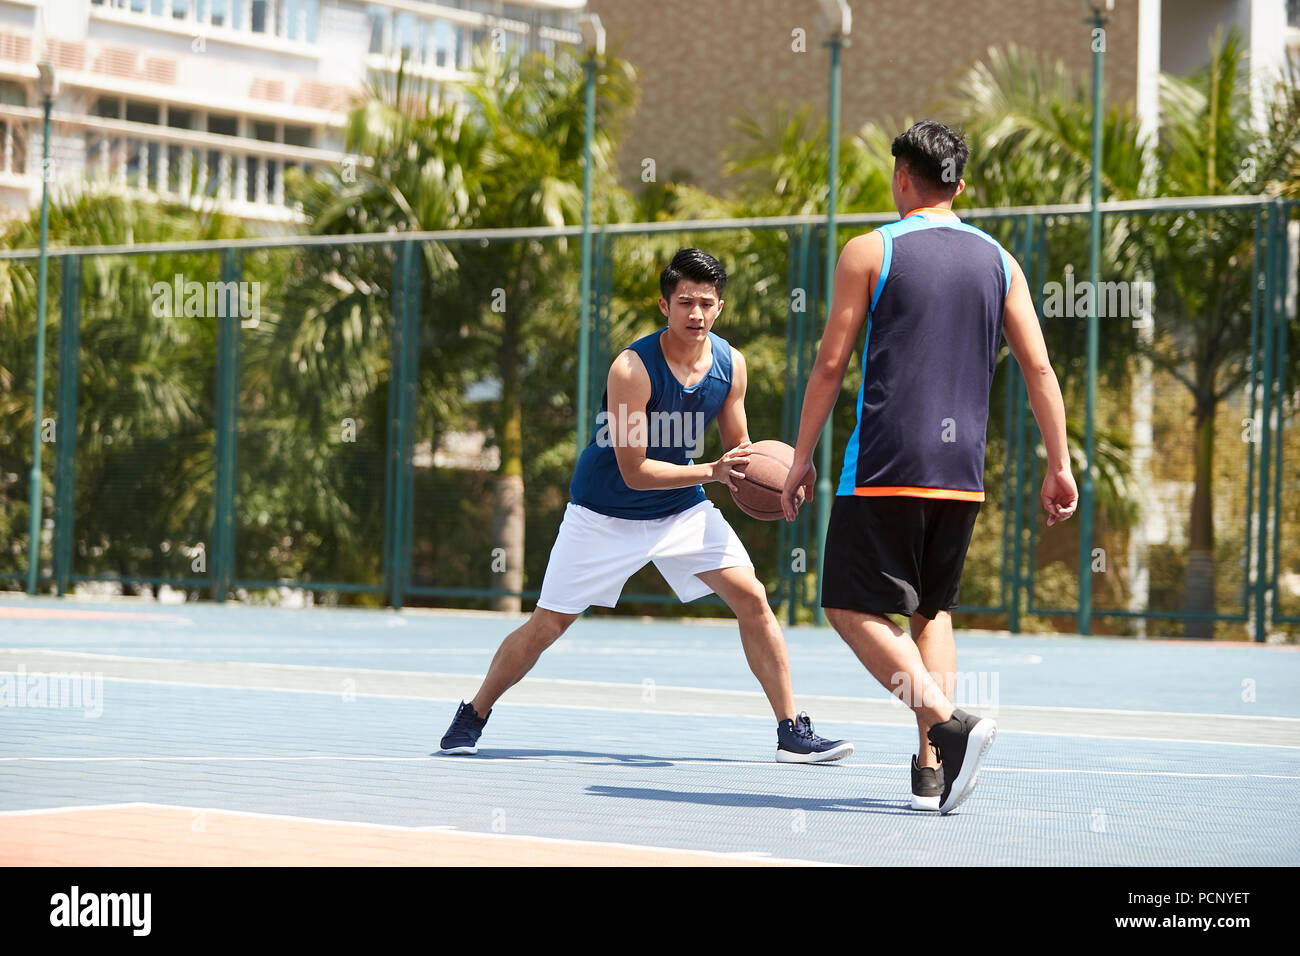 young asian adult players playing basketball on outdoor court. Stock Photo